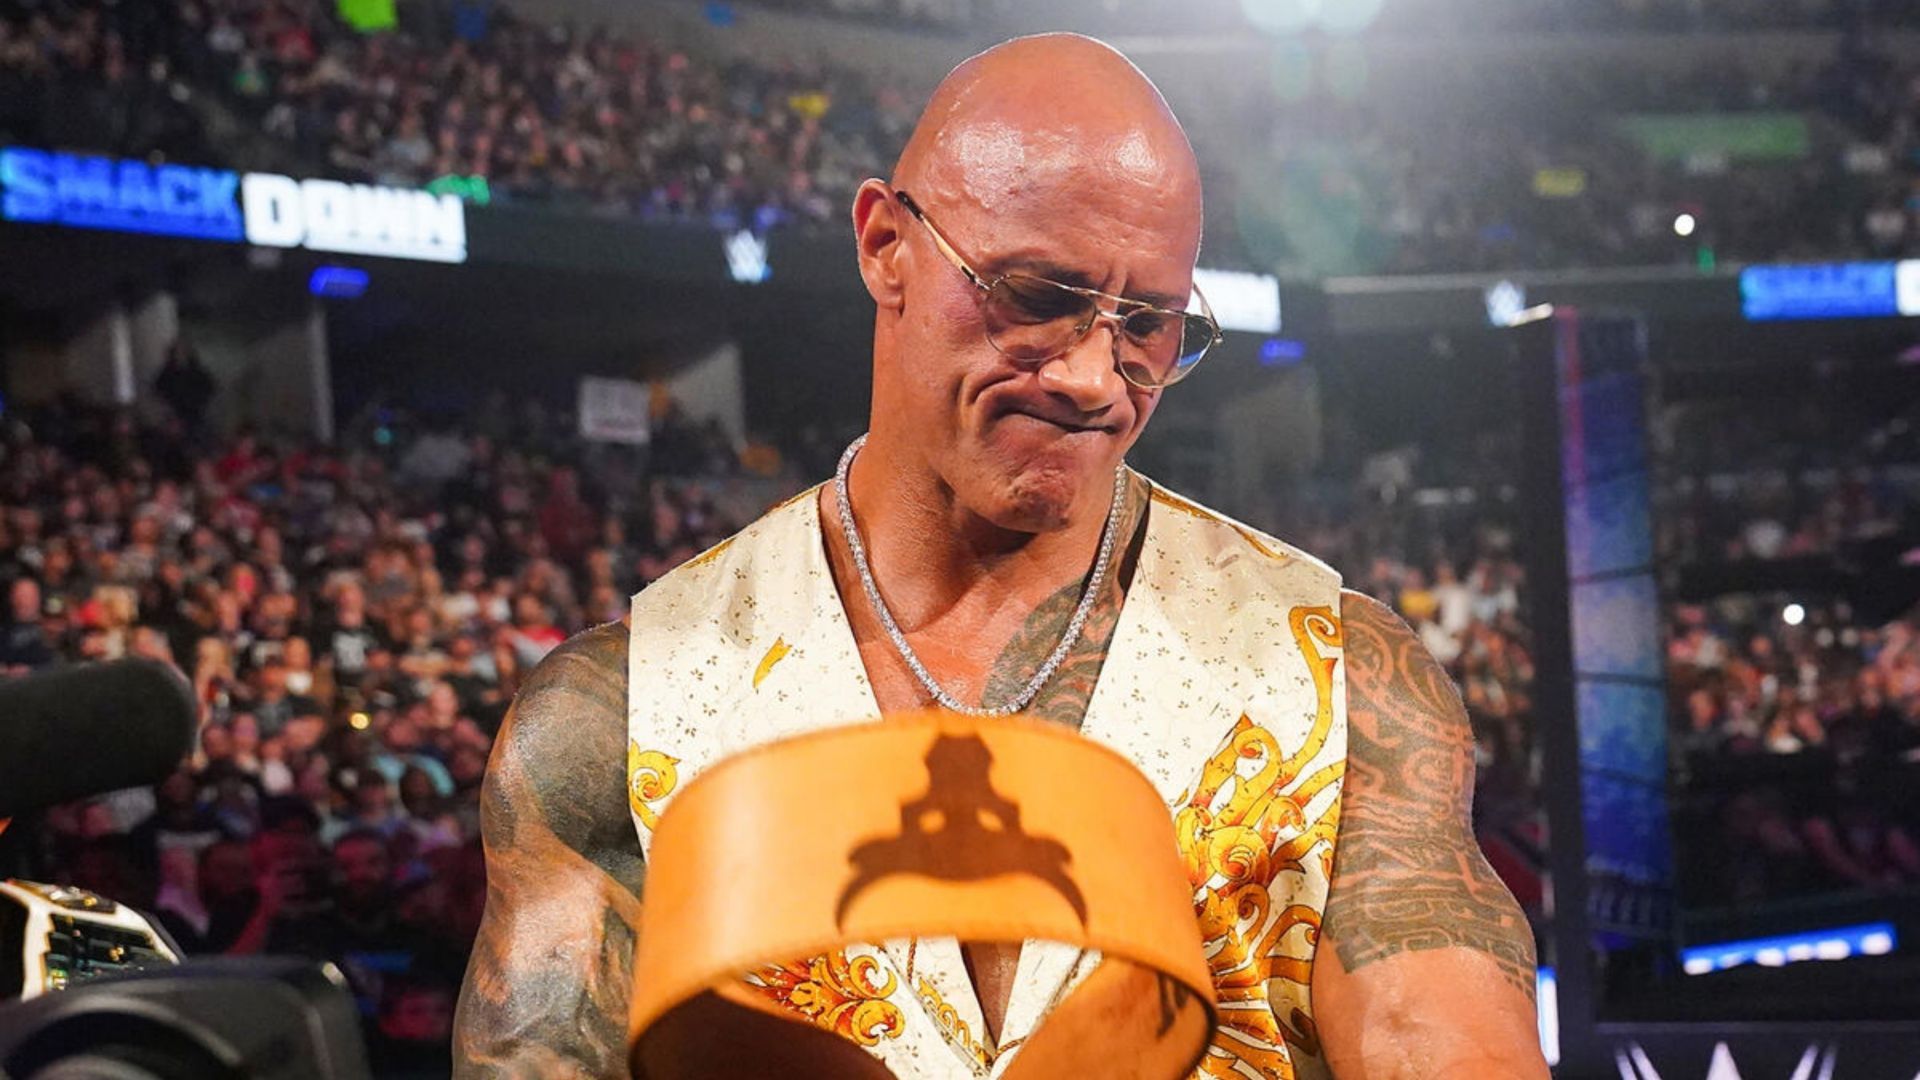 The Rock will wrestle at WWE WrestleMania XL